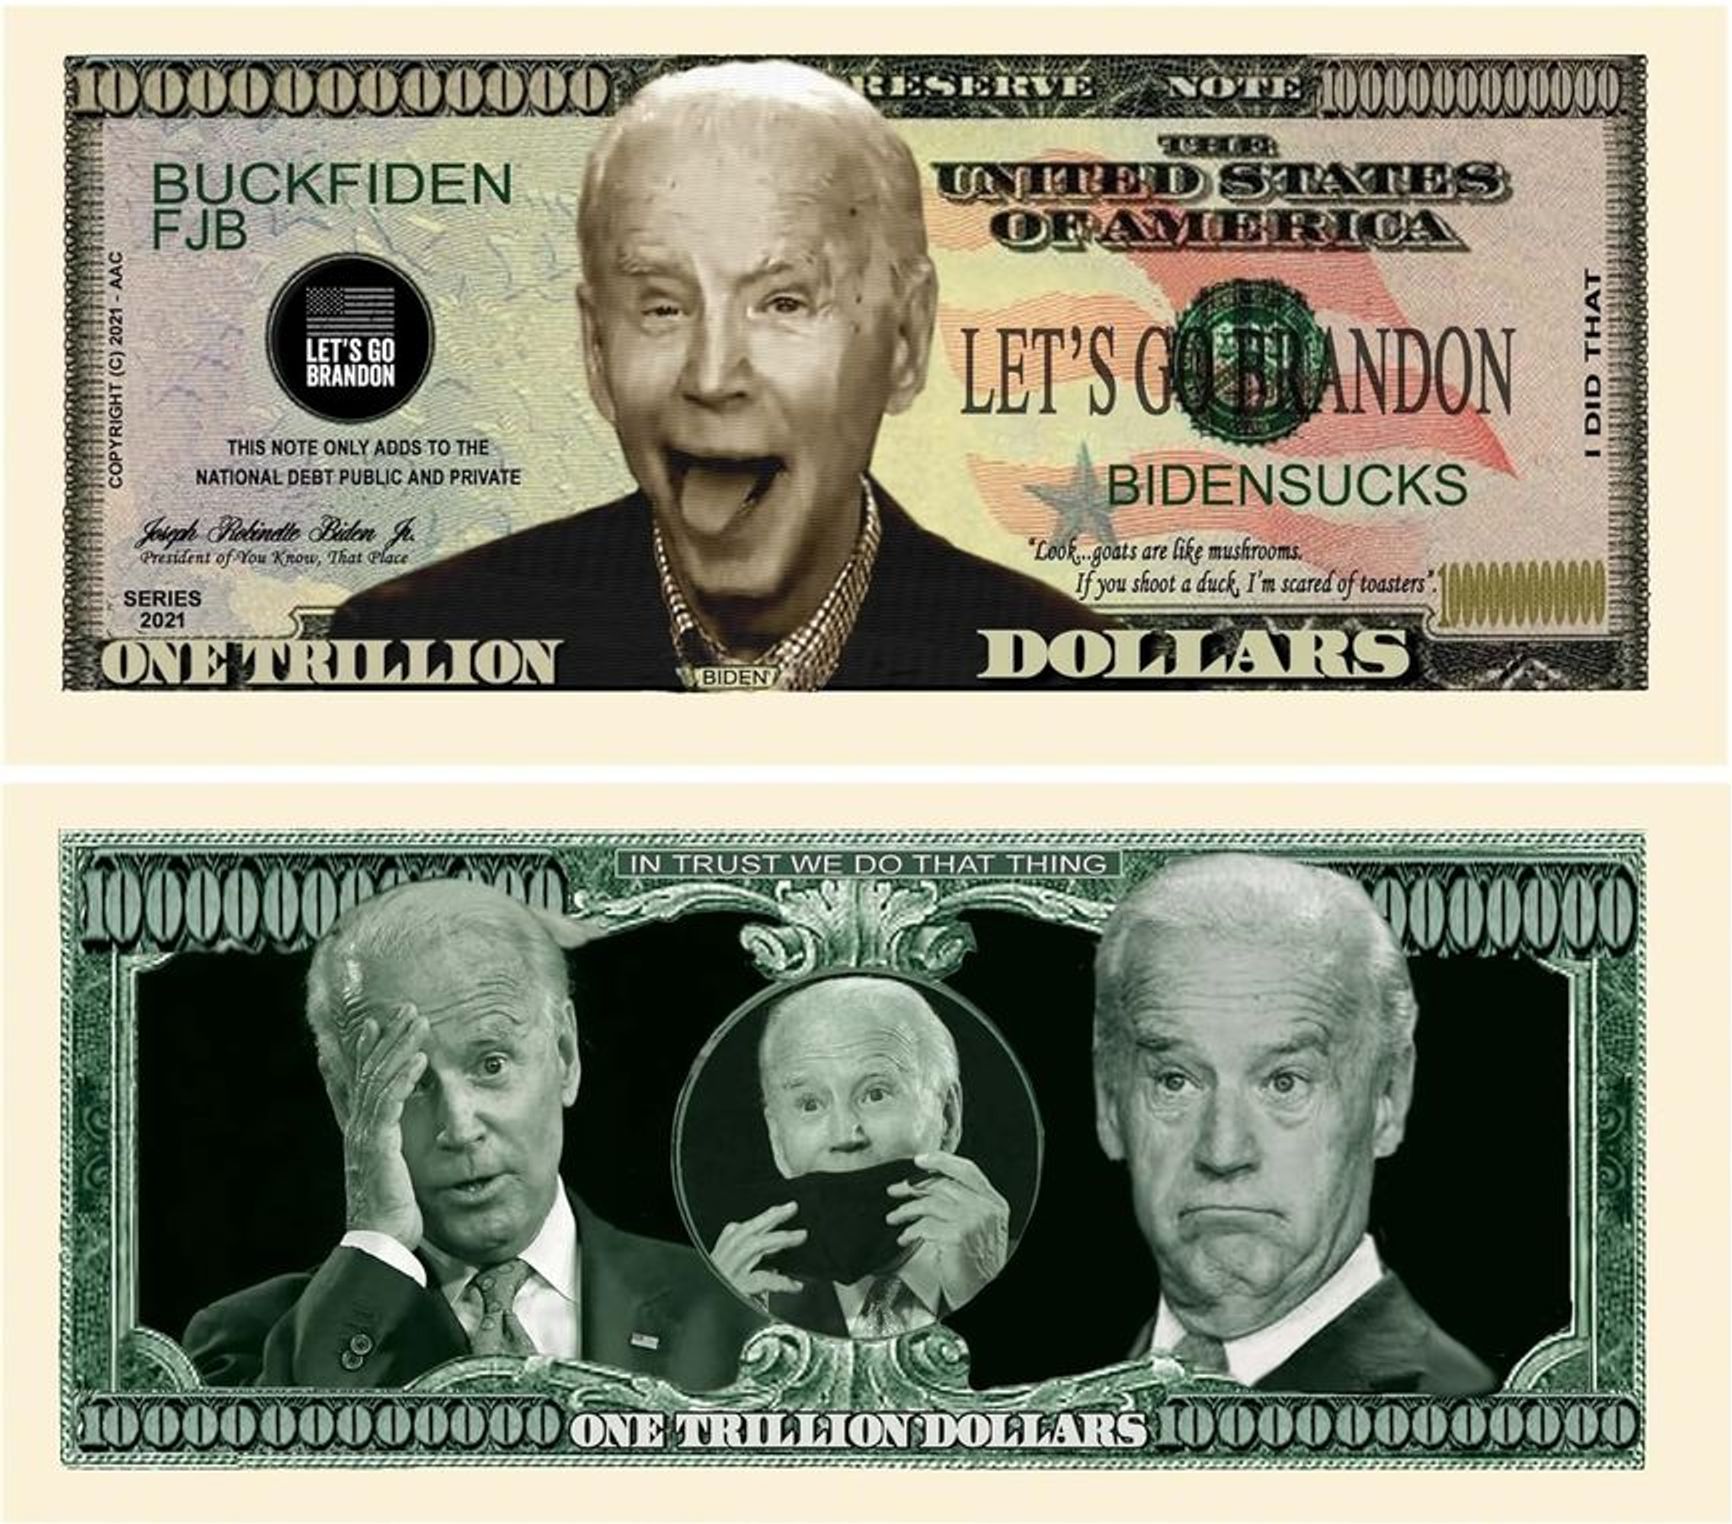 Novelty trillion U.S. dollar notes with Joe Biden's image spread by the Trump campaign